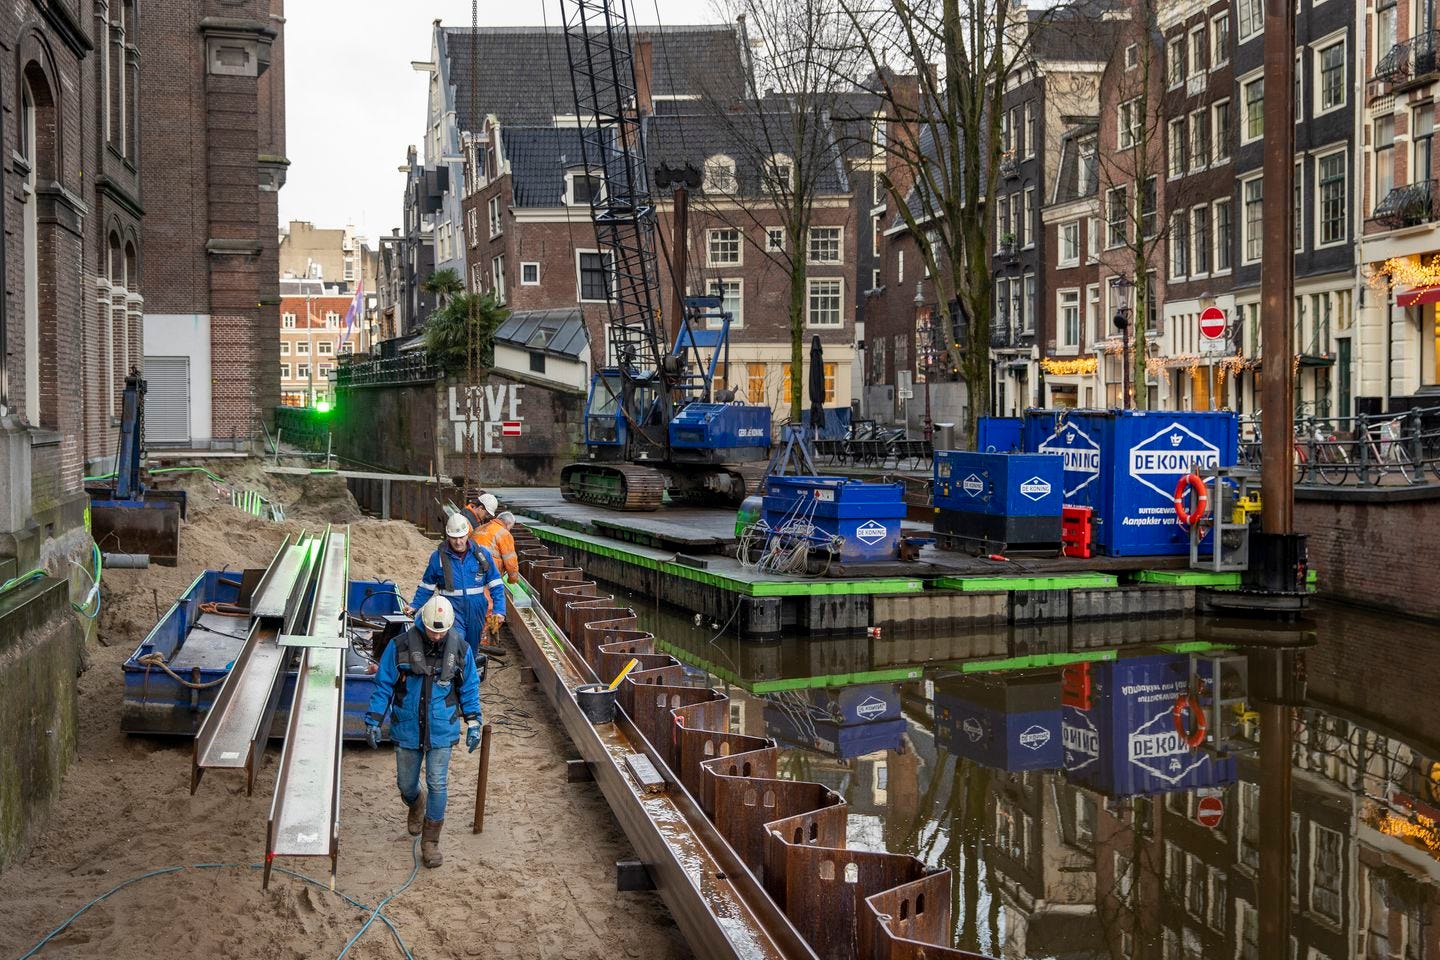 Construction workers worked to rebuild the crumbling canal wall in the Grimburgwal district of Amsterdam in January.